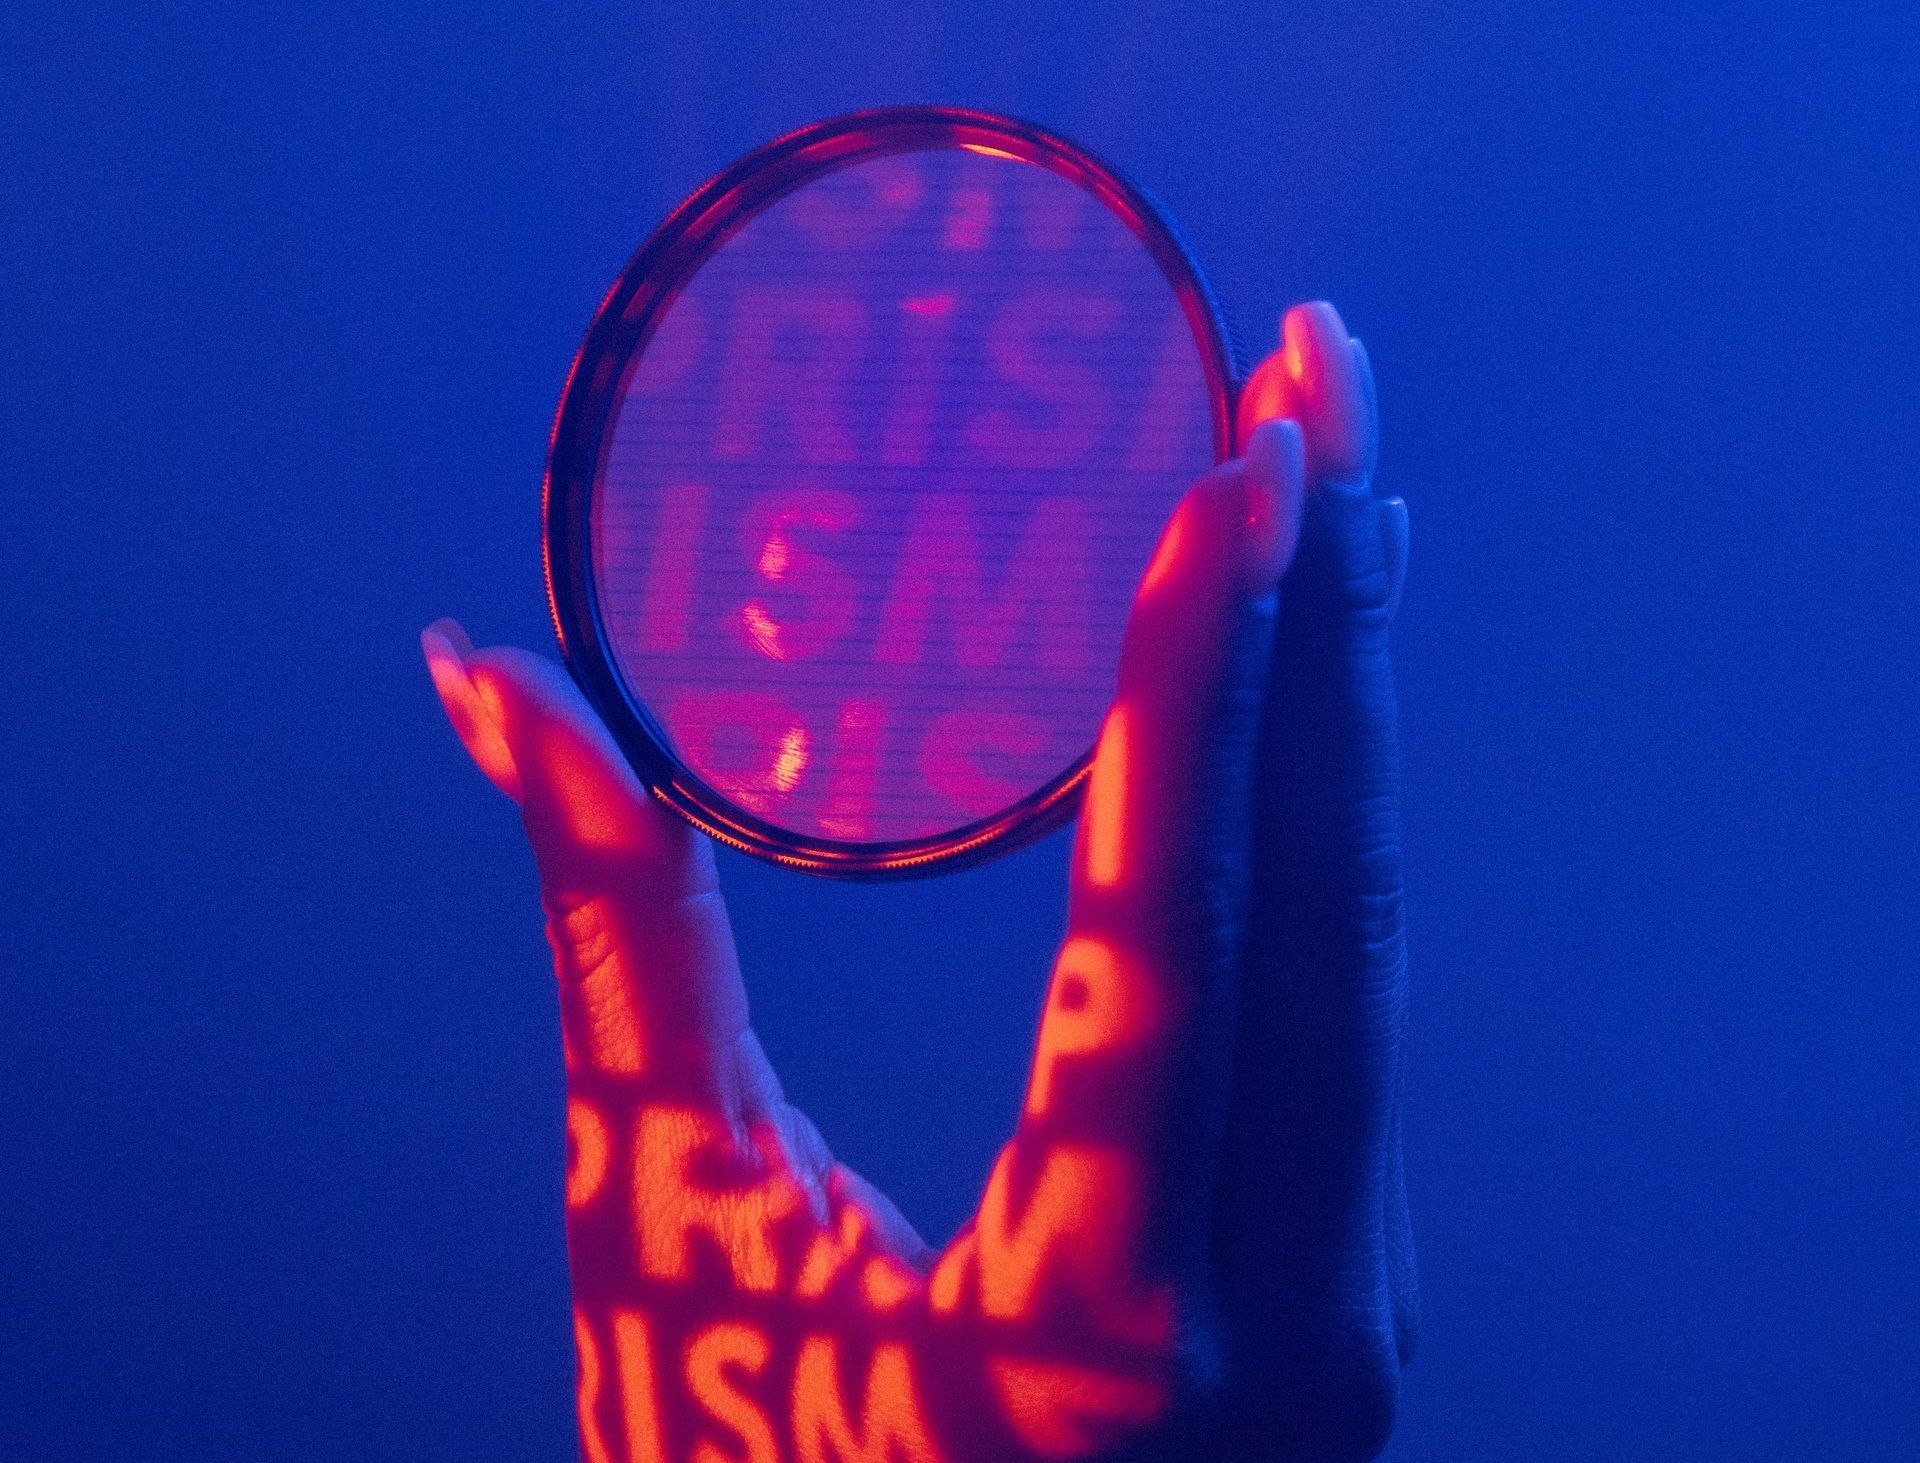 Hand holding lens filter with words prism projected on hand